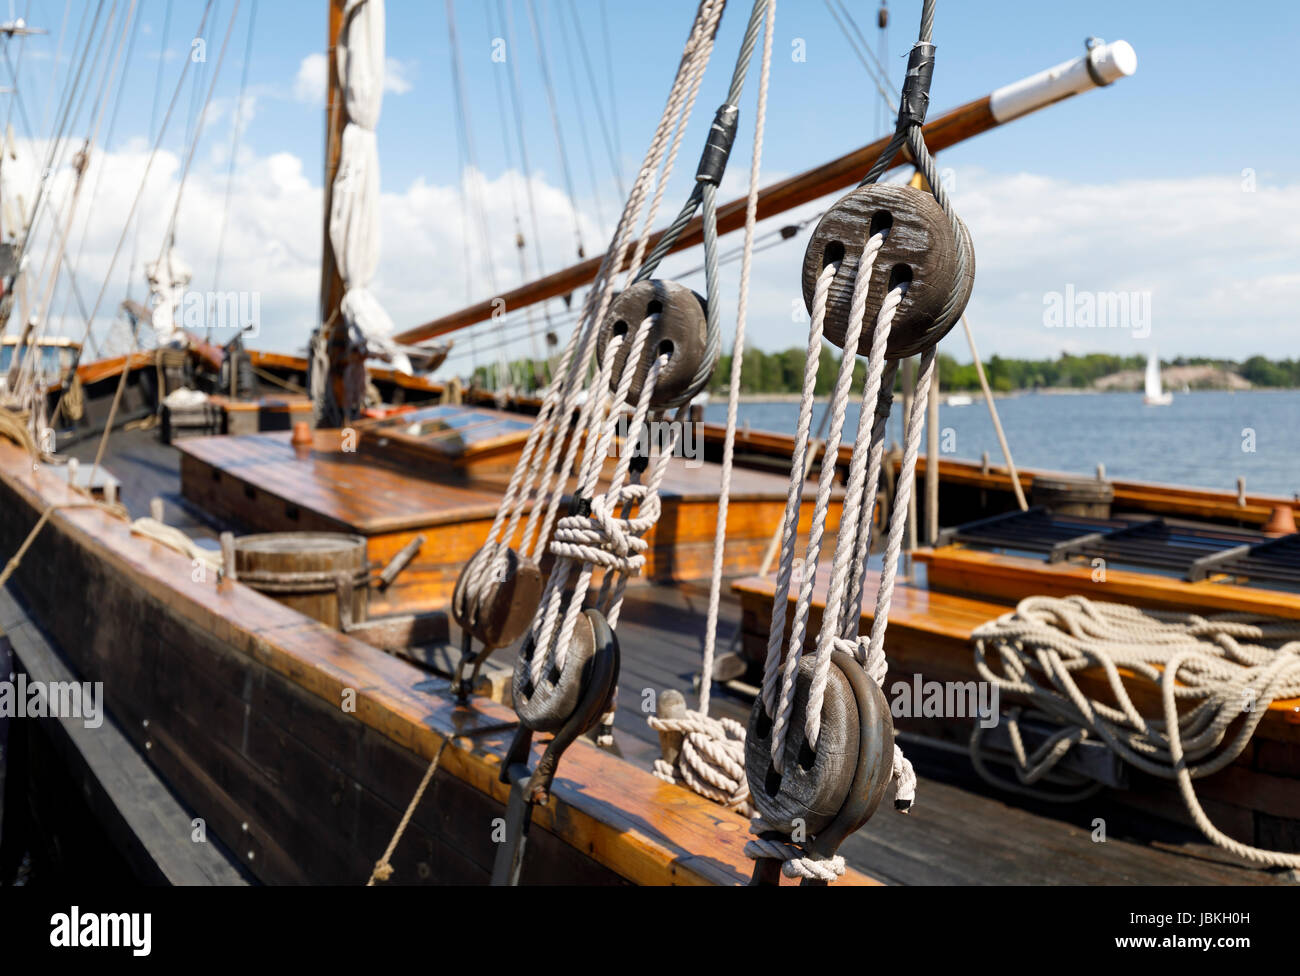 Ancient wooden sailboat pulleys and ropes detail Stock Photo